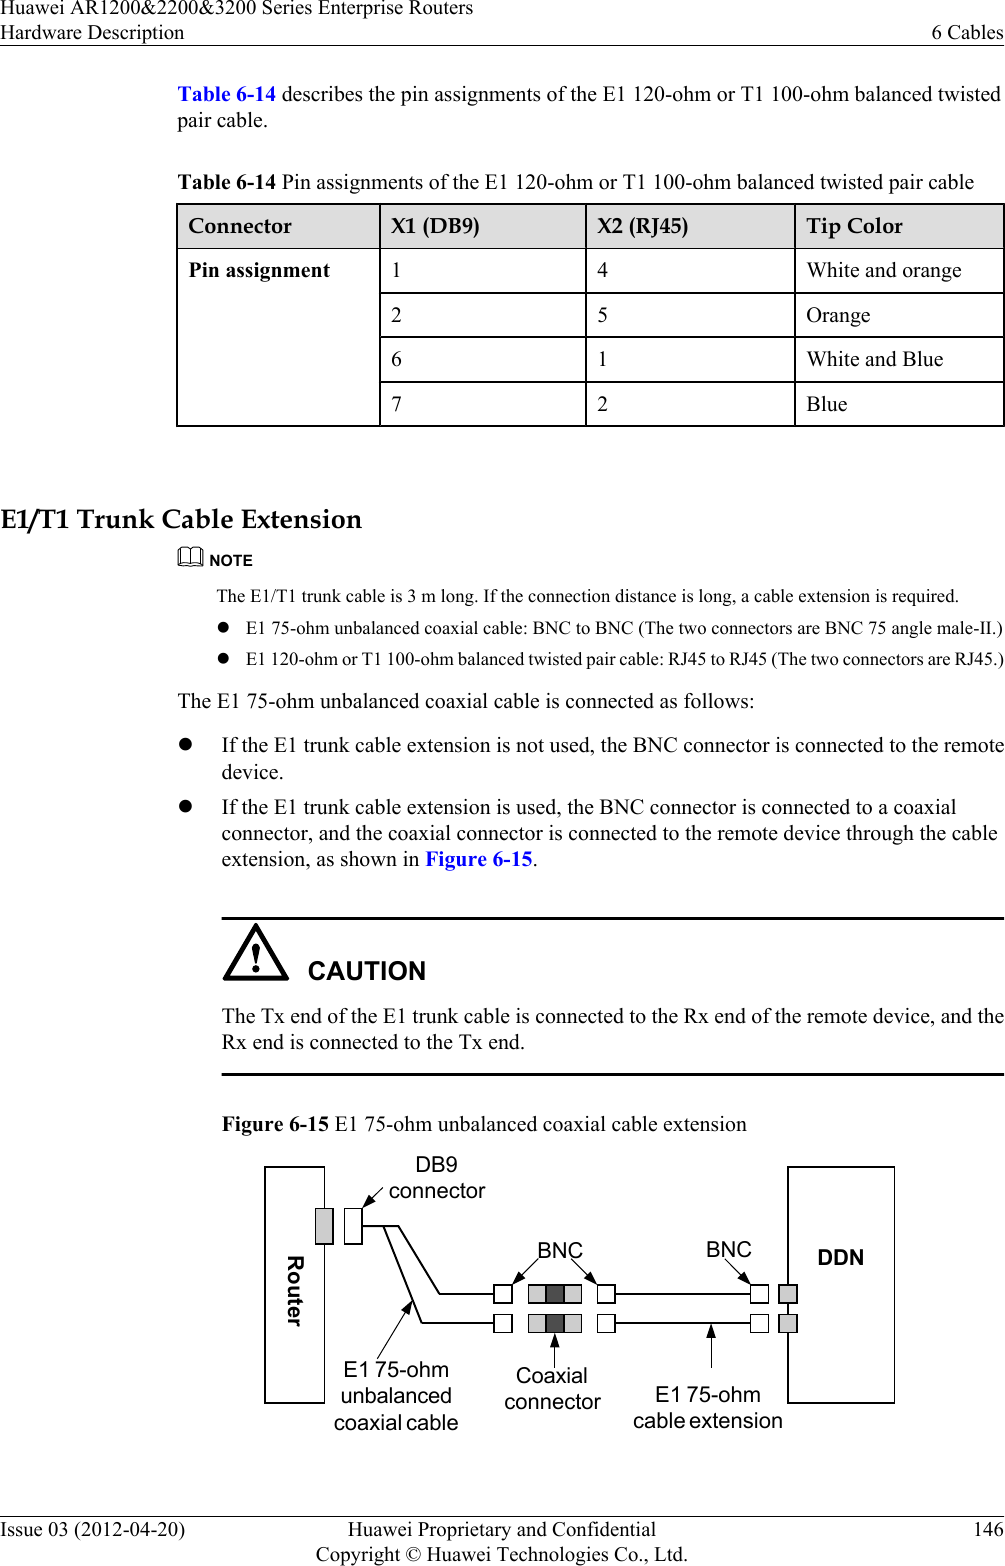 Table 6-14 describes the pin assignments of the E1 120-ohm or T1 100-ohm balanced twistedpair cable.Table 6-14 Pin assignments of the E1 120-ohm or T1 100-ohm balanced twisted pair cableConnector X1 (DB9) X2 (RJ45) Tip ColorPin assignment 1 4 White and orange2 5 Orange6 1 White and Blue7 2 Blue E1/T1 Trunk Cable ExtensionNOTEThe E1/T1 trunk cable is 3 m long. If the connection distance is long, a cable extension is required.lE1 75-ohm unbalanced coaxial cable: BNC to BNC (The two connectors are BNC 75 angle male-II.)lE1 120-ohm or T1 100-ohm balanced twisted pair cable: RJ45 to RJ45 (The two connectors are RJ45.)The E1 75-ohm unbalanced coaxial cable is connected as follows:lIf the E1 trunk cable extension is not used, the BNC connector is connected to the remotedevice.lIf the E1 trunk cable extension is used, the BNC connector is connected to a coaxialconnector, and the coaxial connector is connected to the remote device through the cableextension, as shown in Figure 6-15.CAUTIONThe Tx end of the E1 trunk cable is connected to the Rx end of the remote device, and theRx end is connected to the Tx end.Figure 6-15 E1 75-ohm unbalanced coaxial cable extensionRouterDB9connectorBNCE1 75-ohmunbalancedcoaxial cableCoaxialconnector E1 75-ohmcable extensionDDNBNCHuawei AR1200&amp;2200&amp;3200 Series Enterprise RoutersHardware Description 6 CablesIssue 03 (2012-04-20) Huawei Proprietary and ConfidentialCopyright © Huawei Technologies Co., Ltd.146